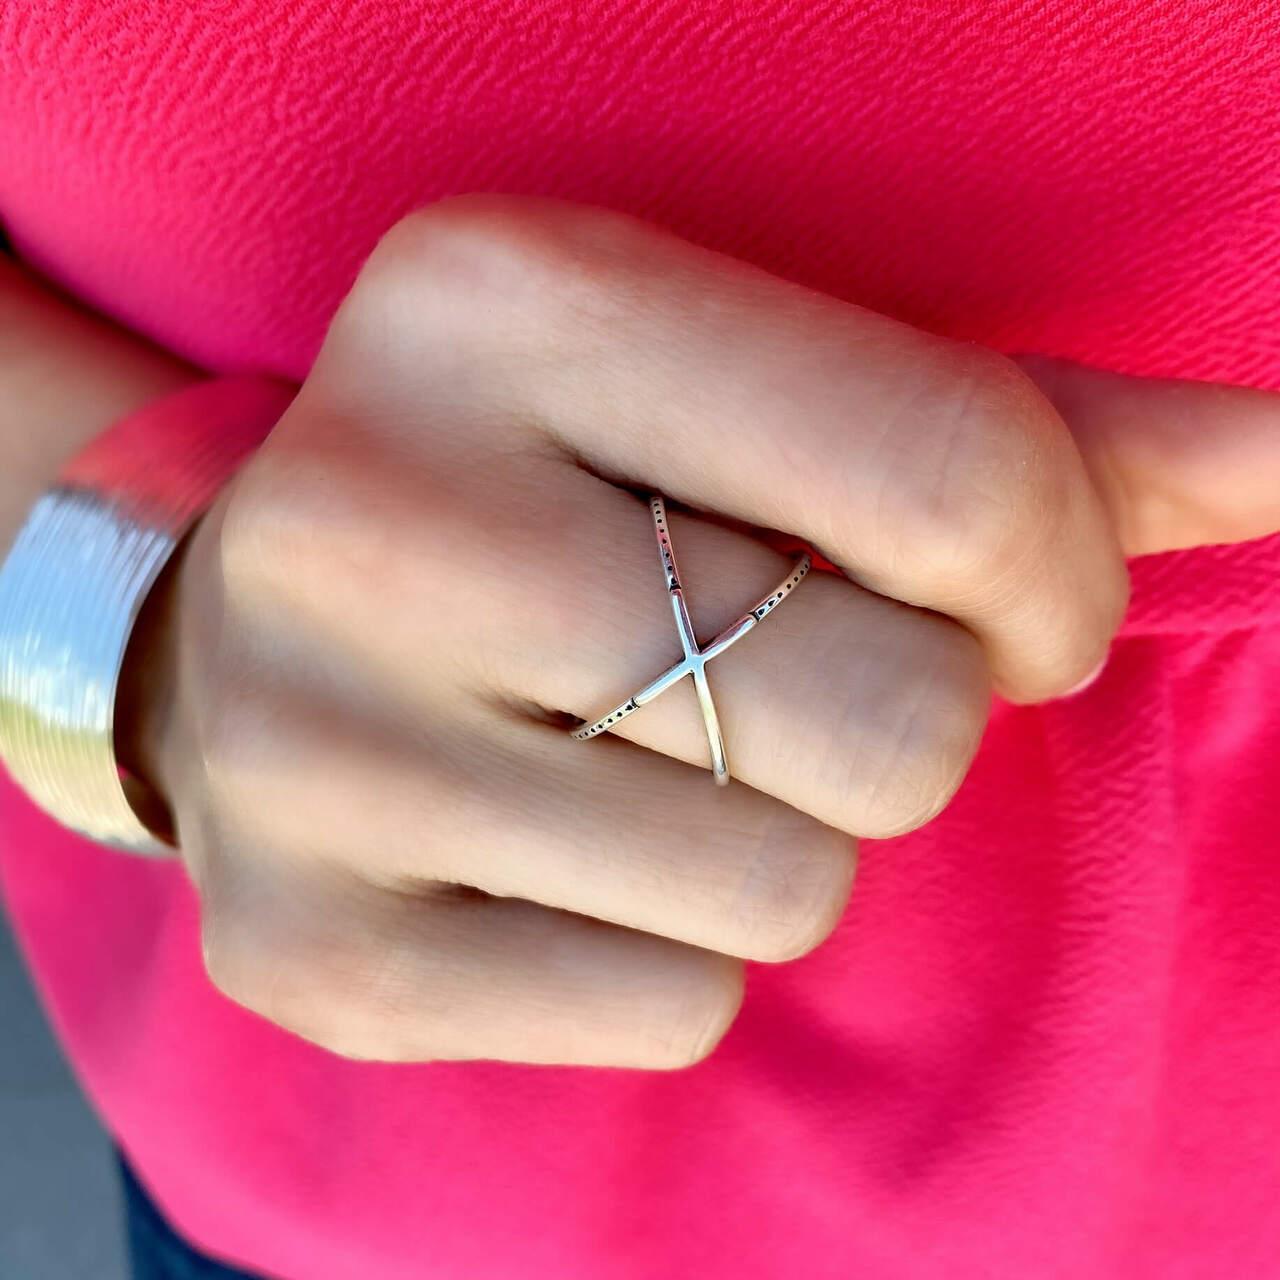 Crossroad Ring in .925 sterling silver